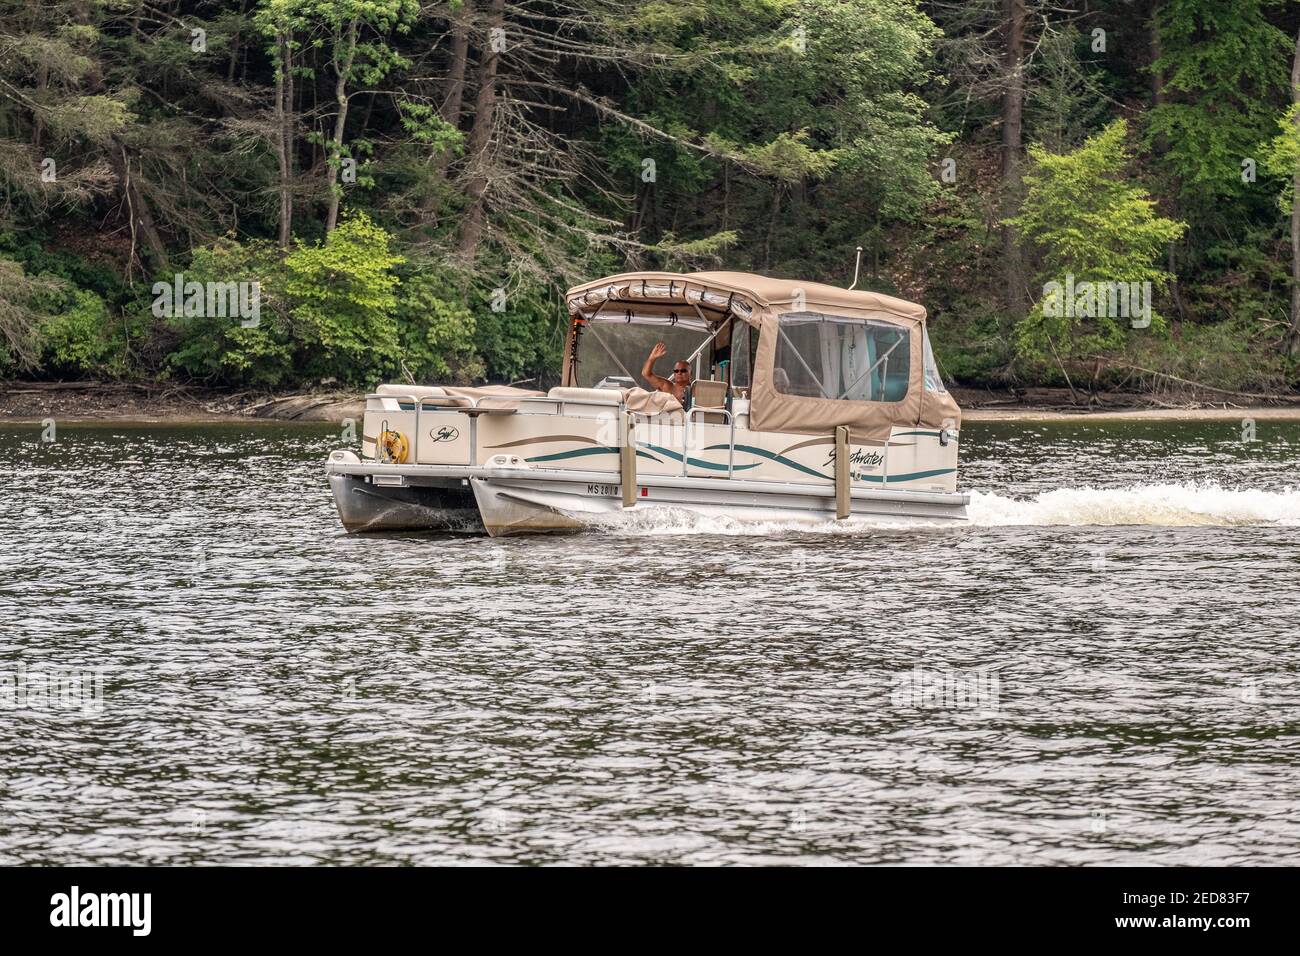 A boat on the Connecticut River in Turners Falls, Massachusetts Stock Photo